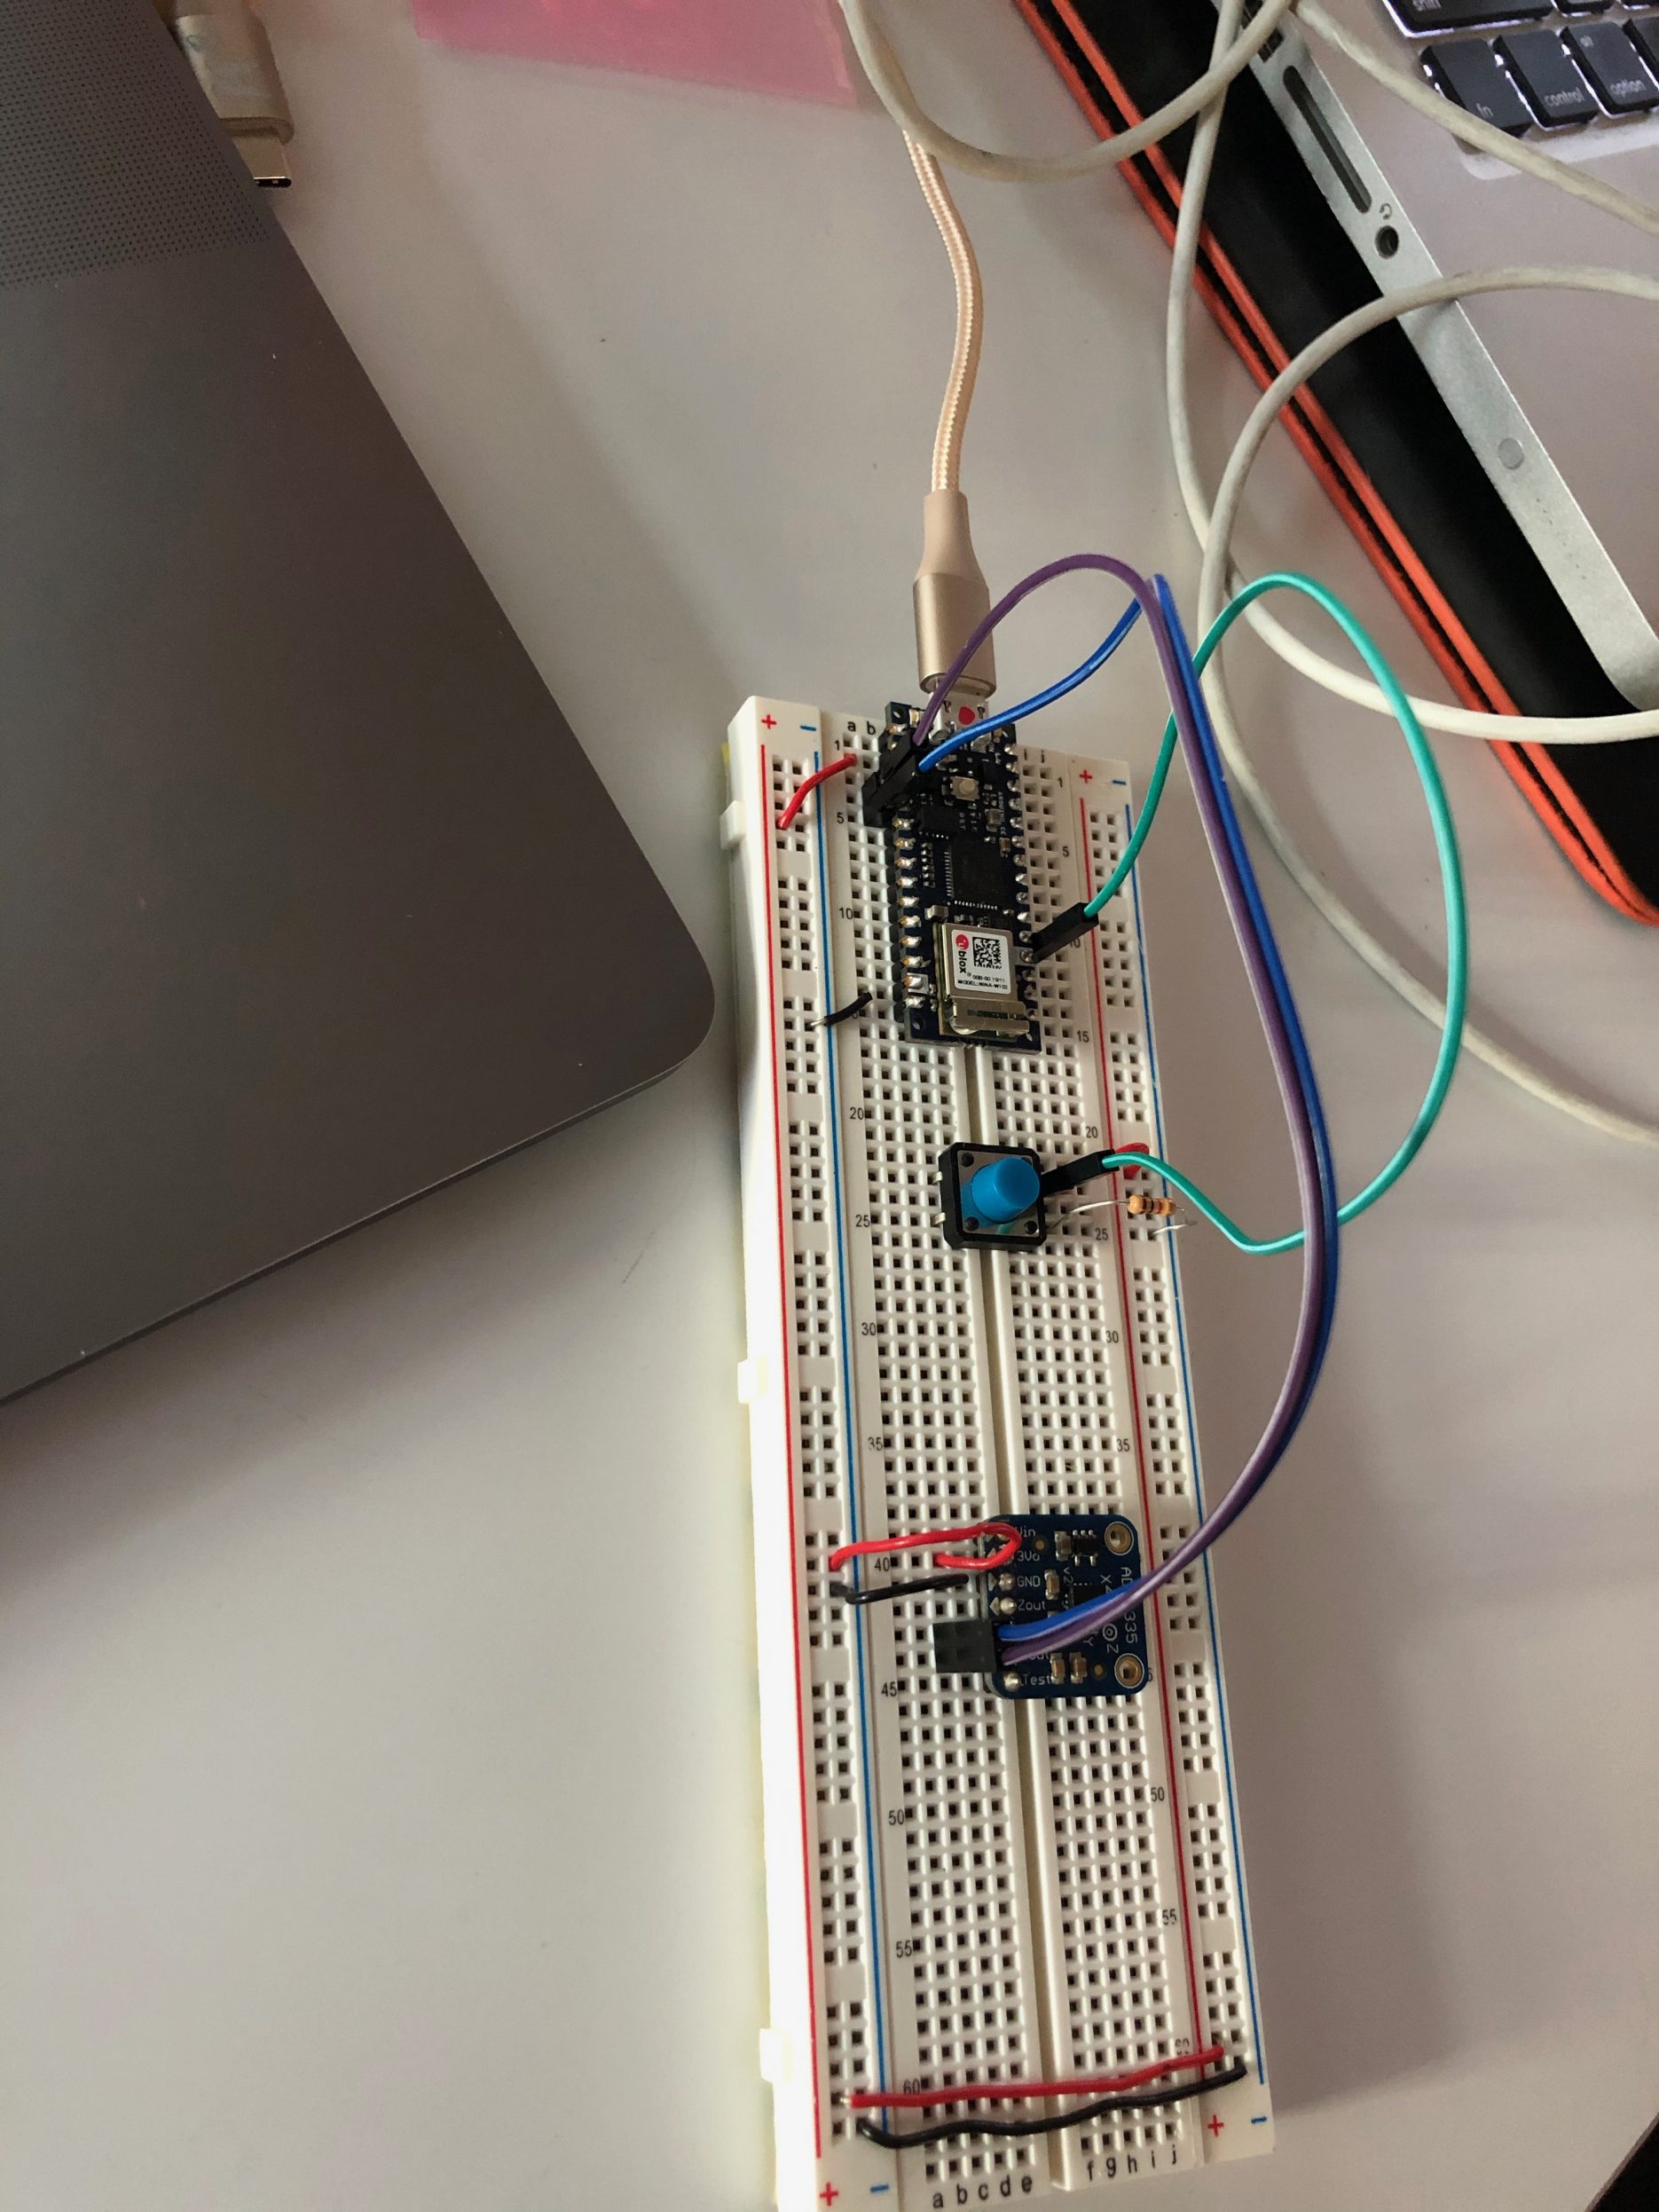 Breadboard setup with accelerometer and button.